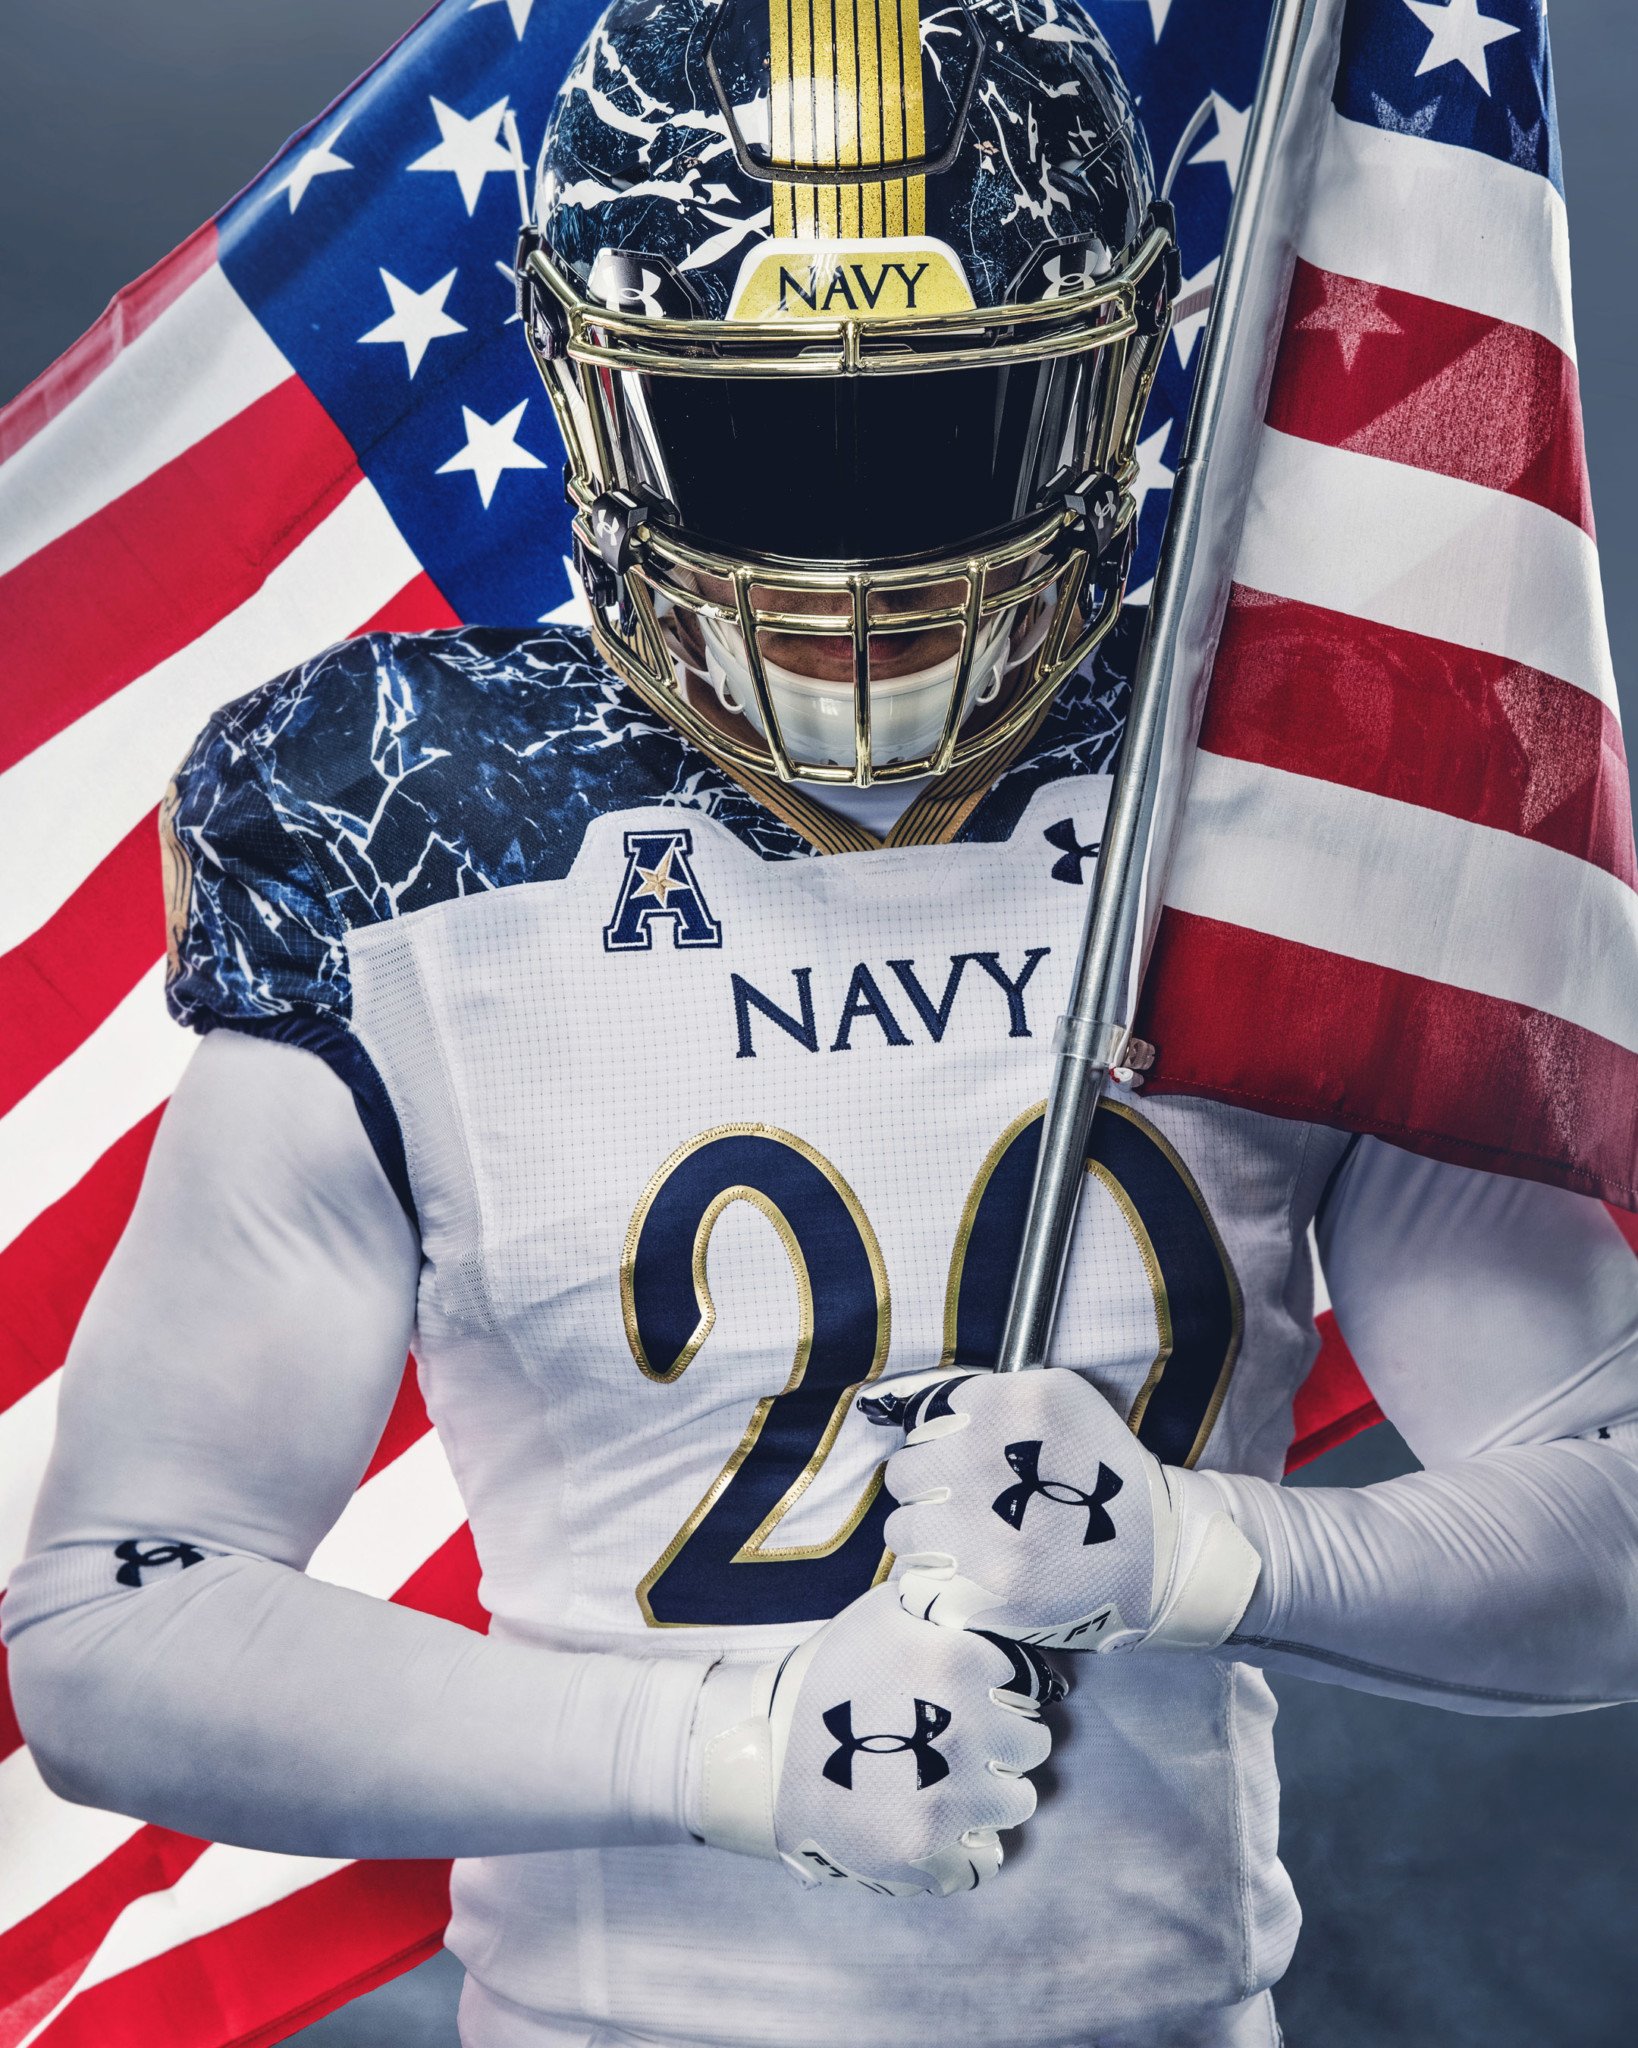 Behind the Scenes of Photoshoot for Navy's Specialty 'Army vs Navy ...